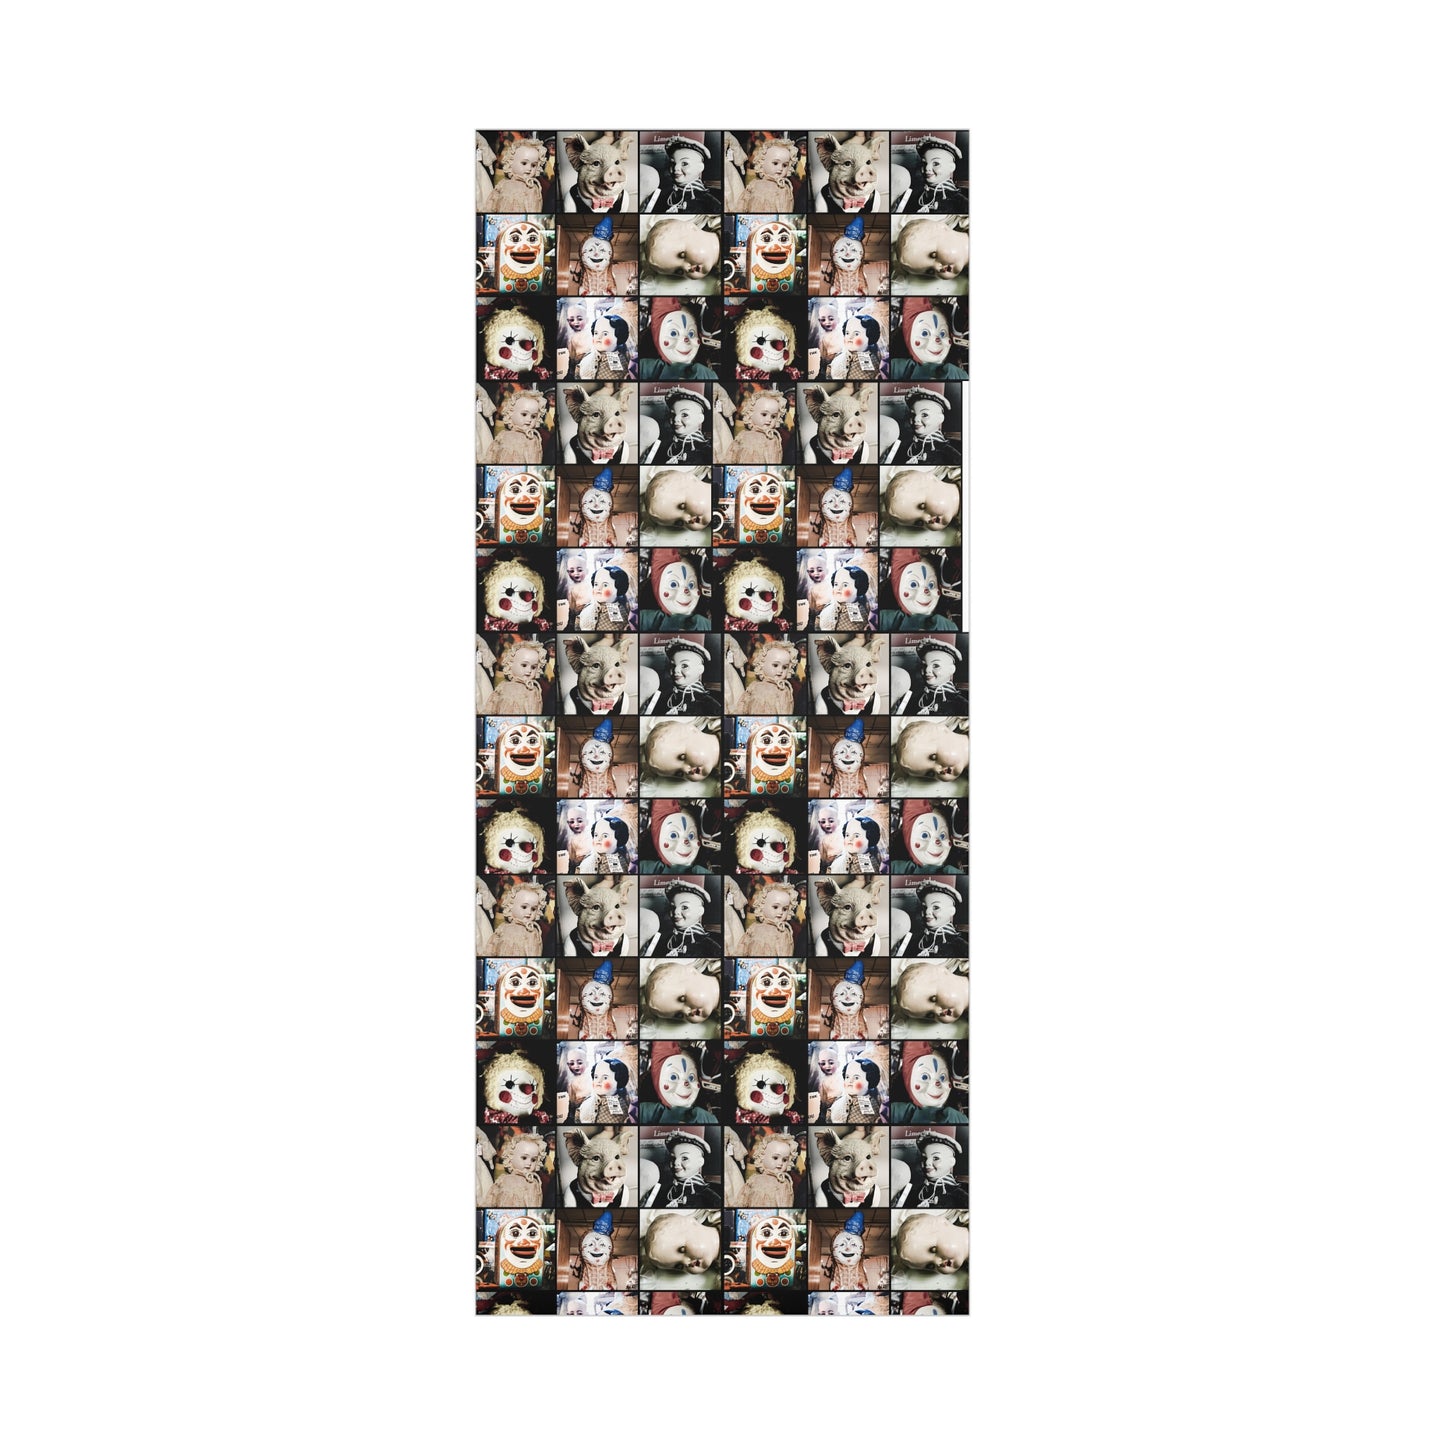 Antique Faces Gift Wrap Papers